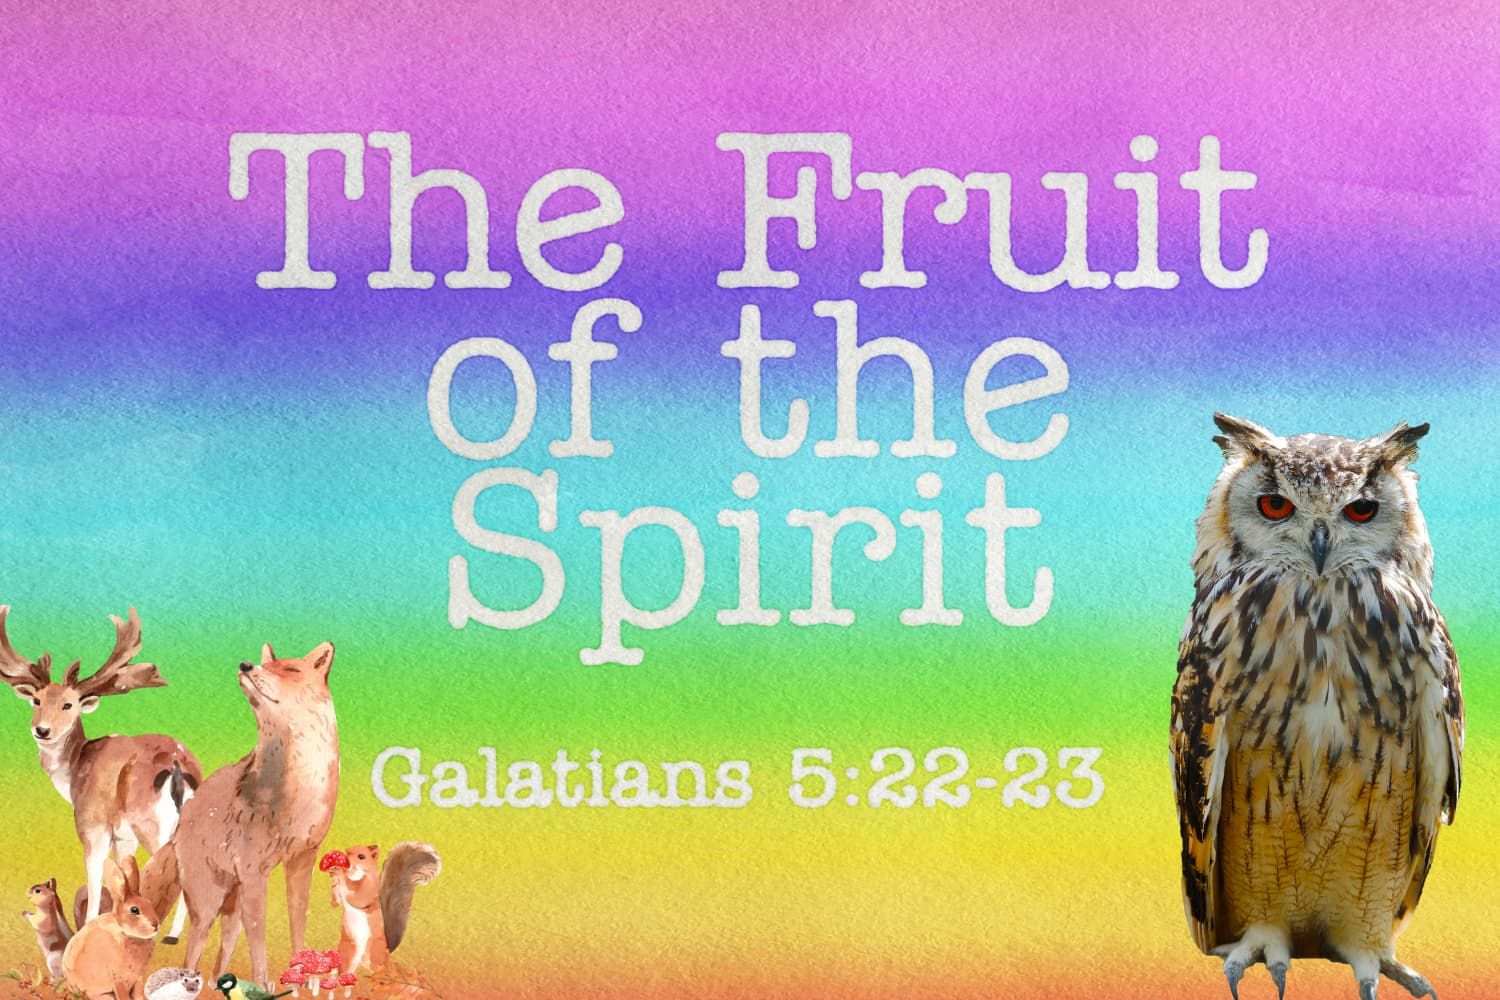 Parable%20-%20Wise%20owl%20and%20fruit%20of%20the%20spirit-d9417540 Galatians